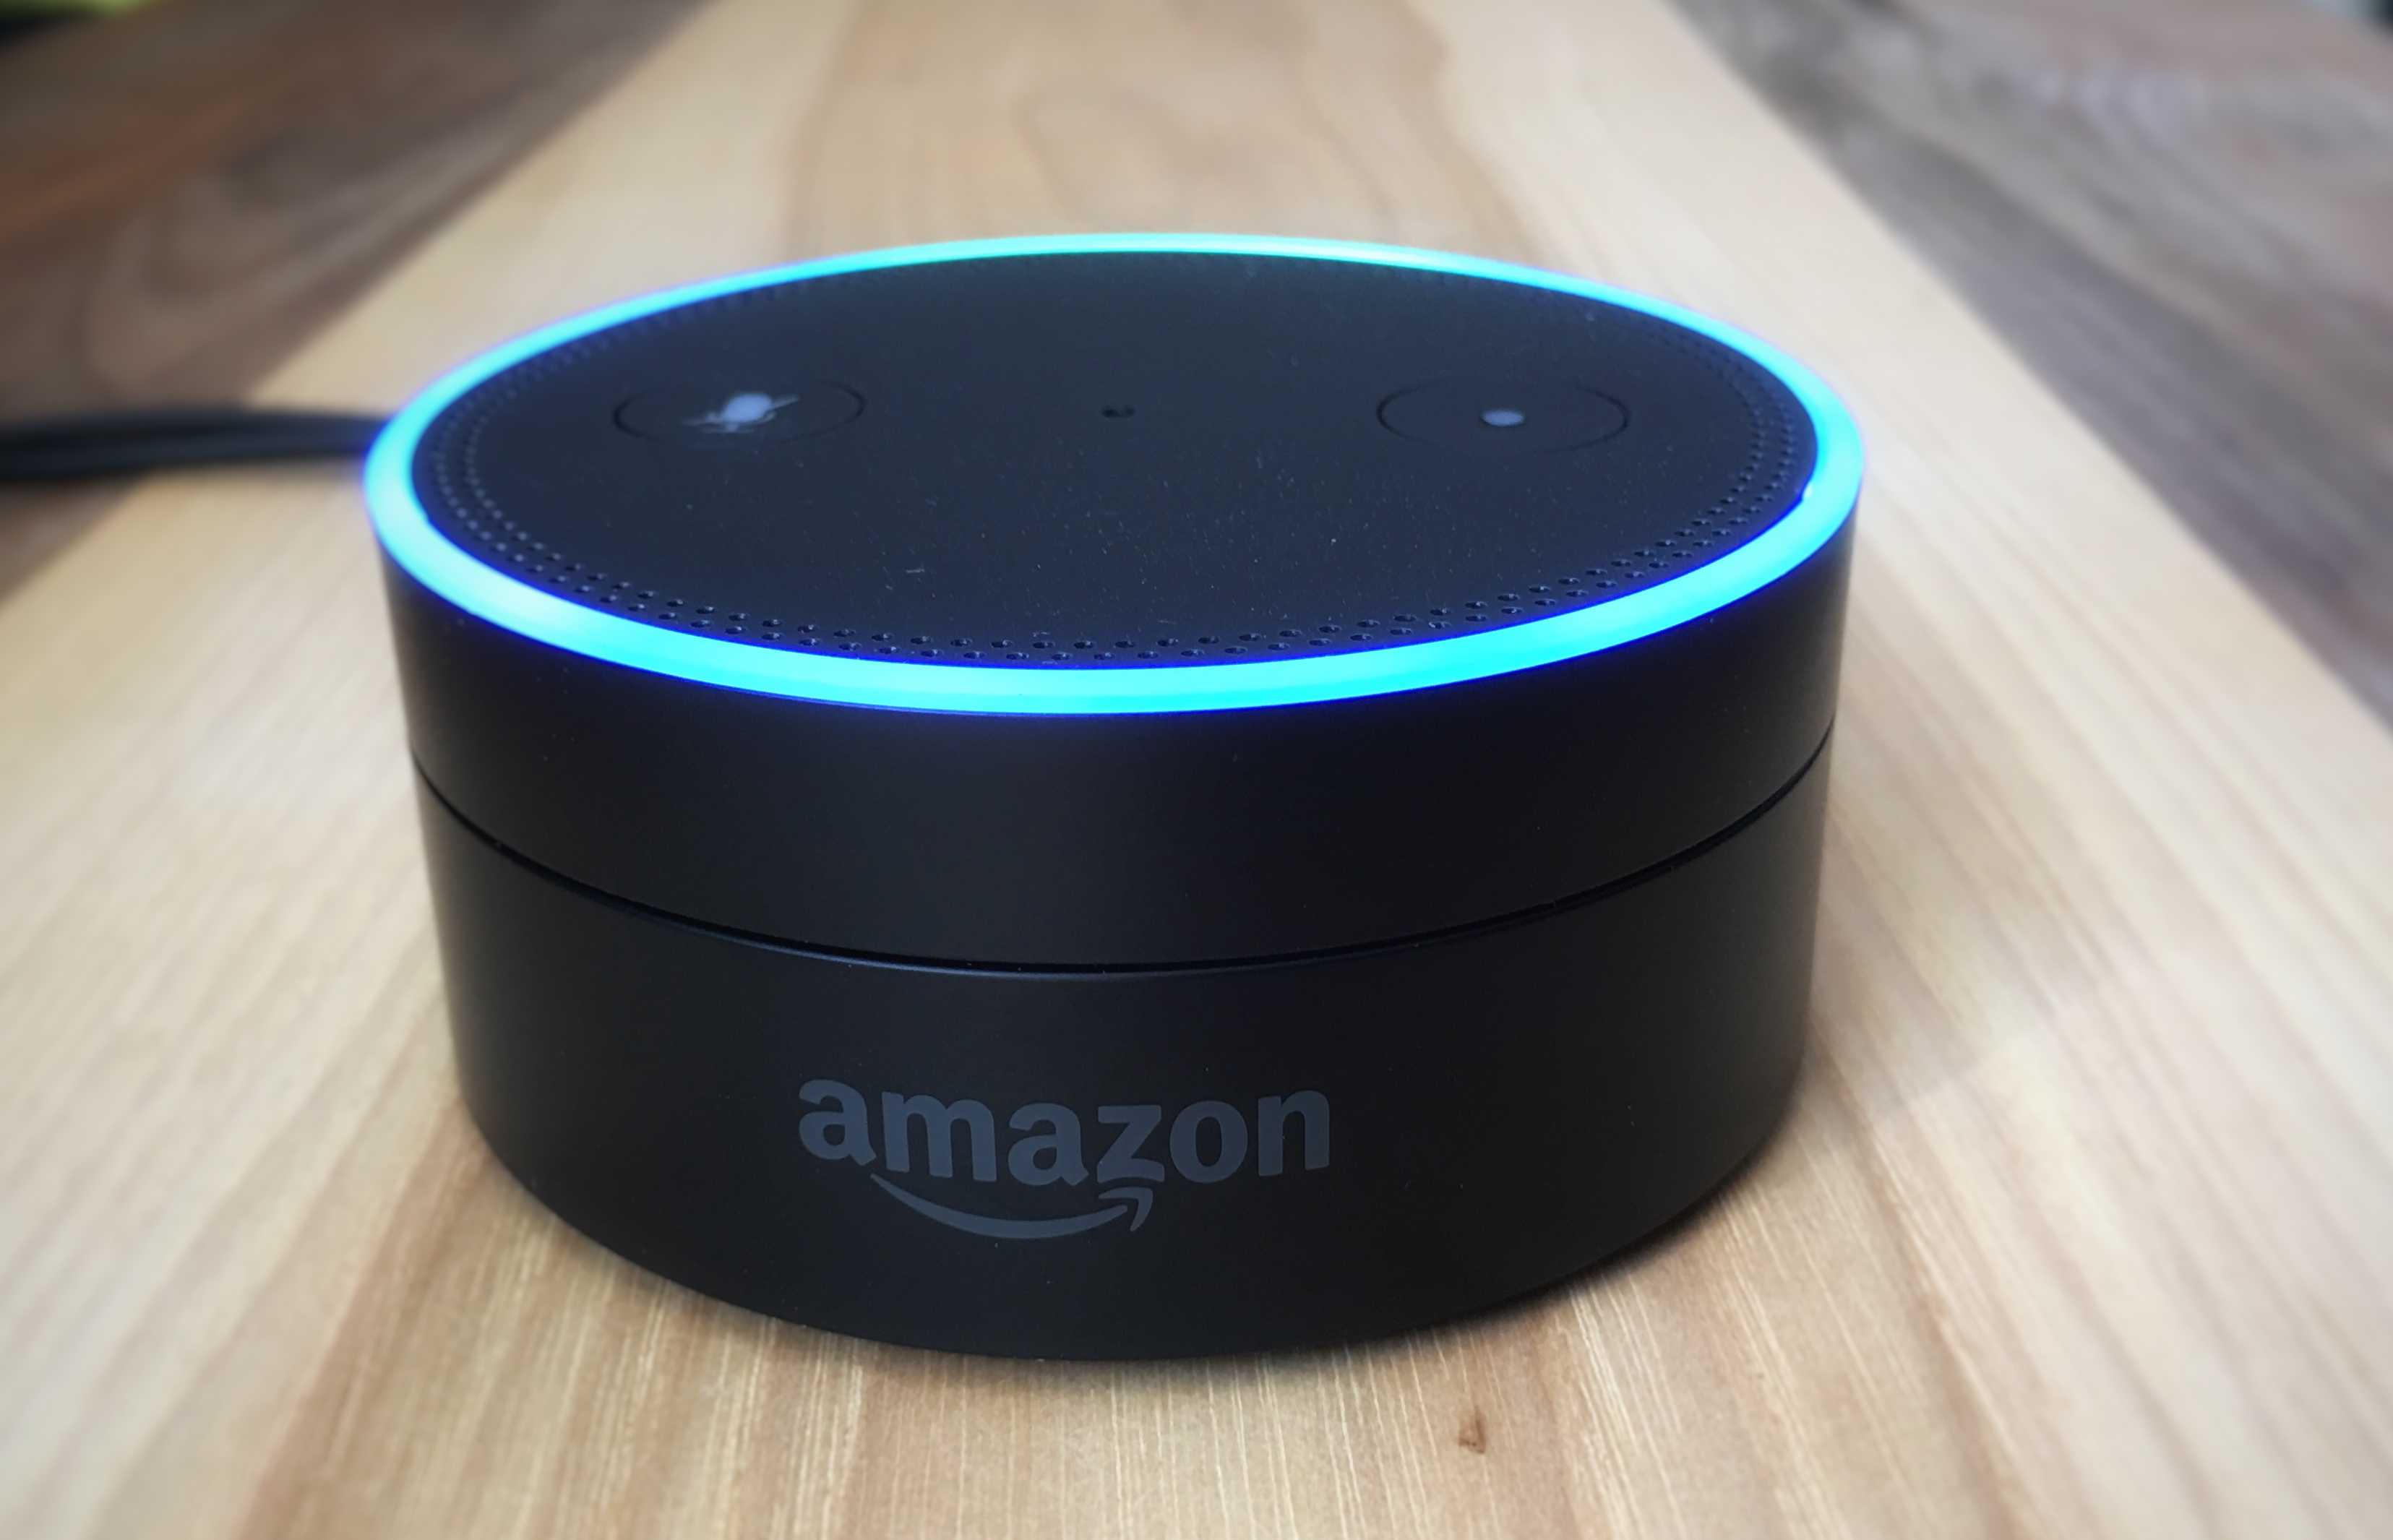 Connect the Amazon Echo Dot to your existing speaker system, and you bingo! -- your speakers just got smart.